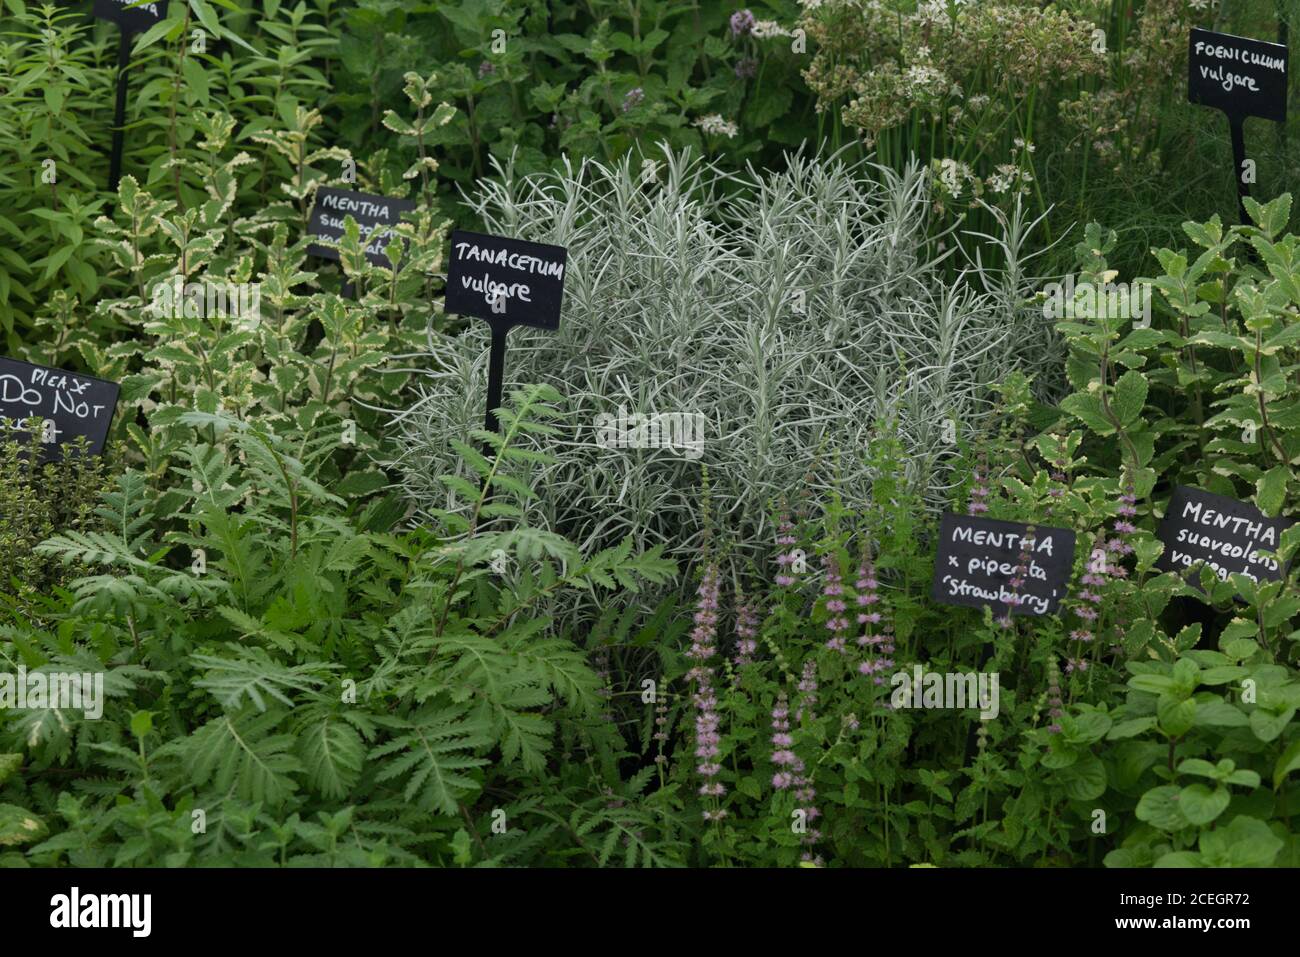 tanacetum vulgare and other mints and herbs growing in the garden Stock Photo